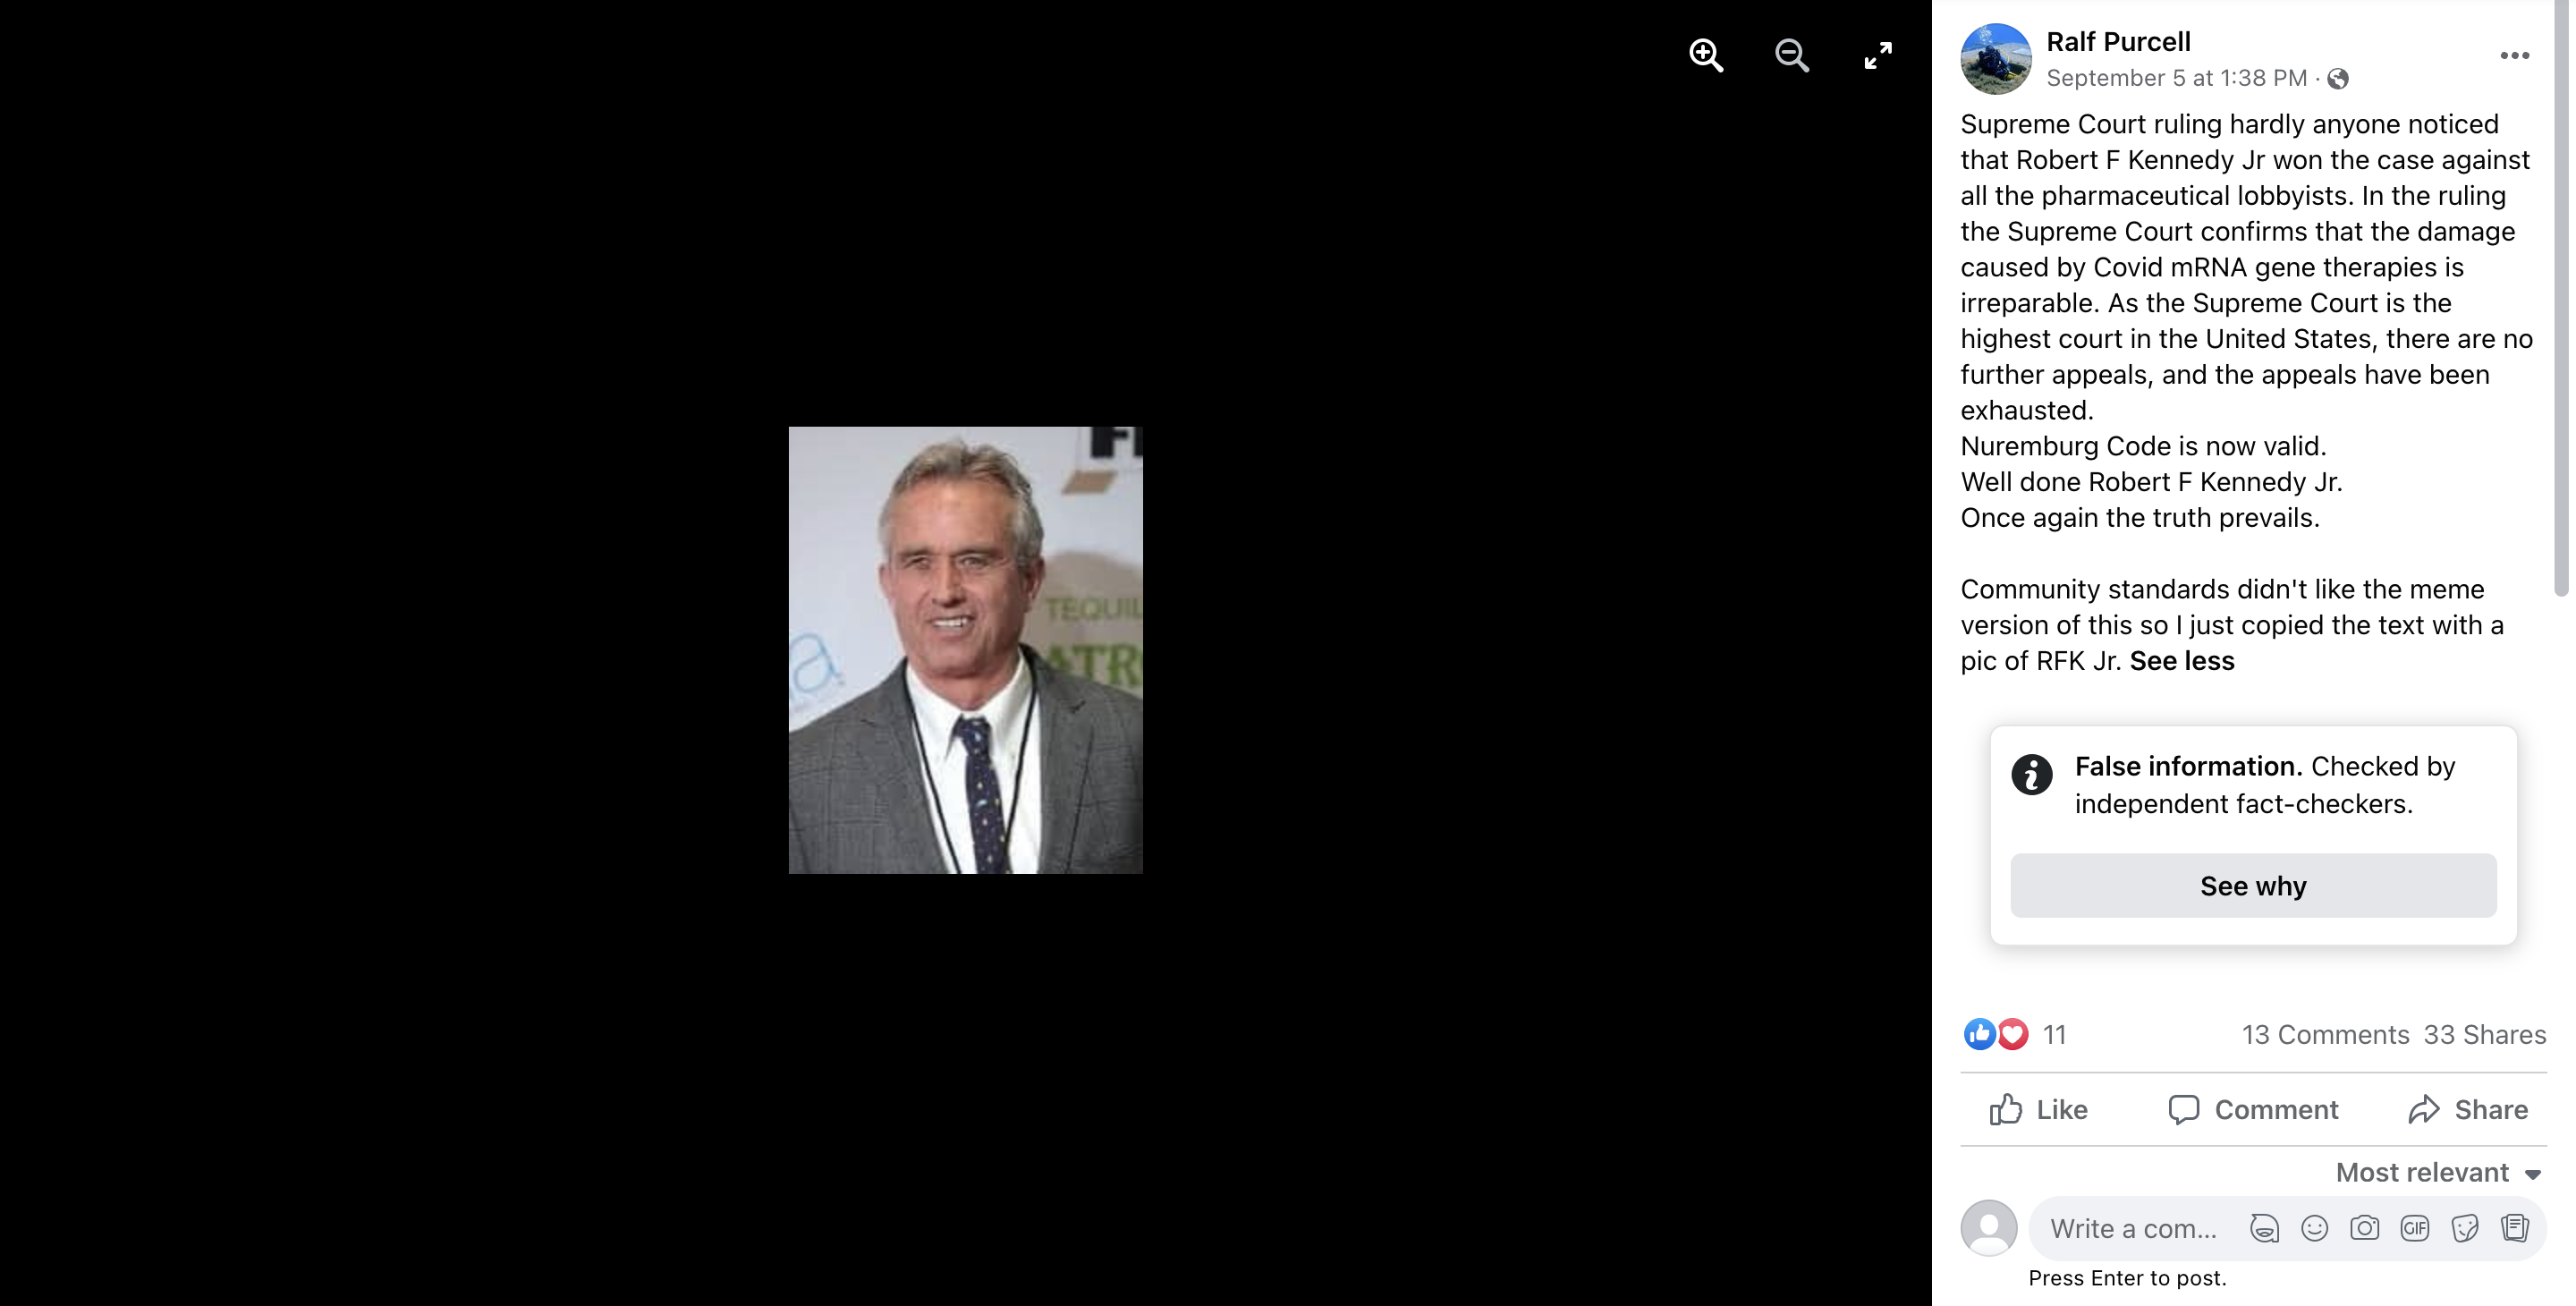 Fact Check: Robert F Kennedy Jr Did NOT Win Supreme Court Ruling On